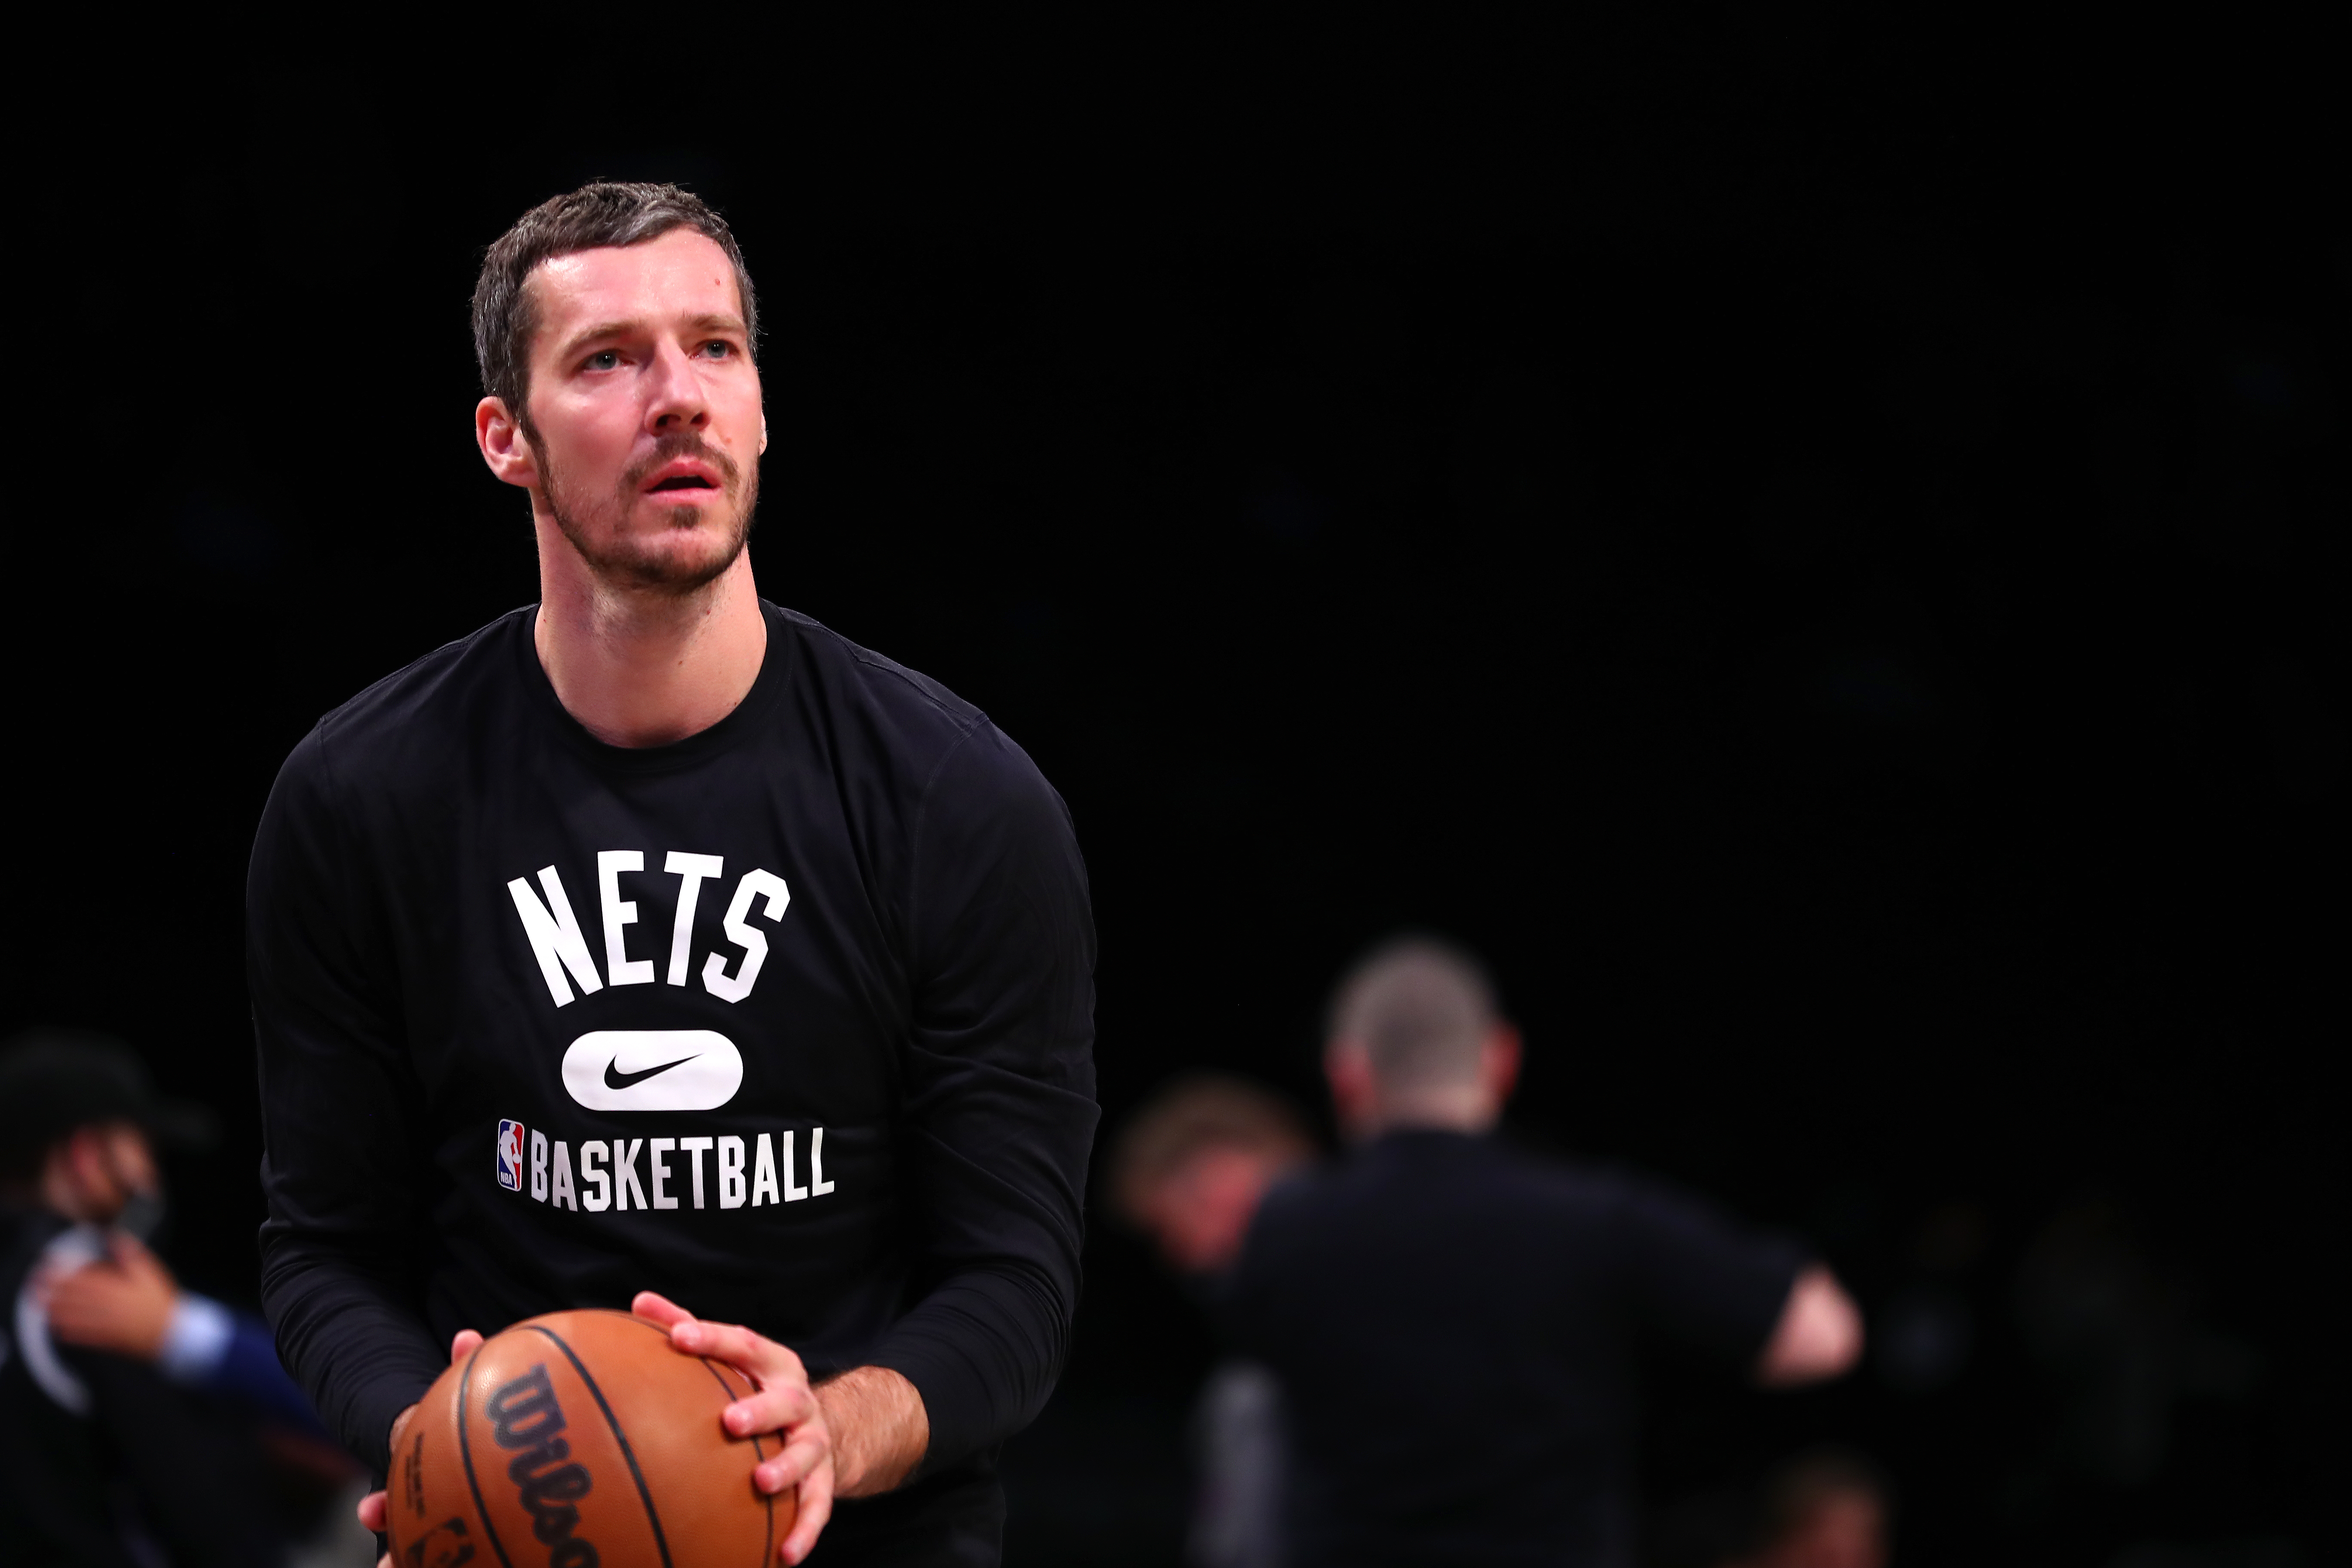 Goran Dragic moves from the Spurs to the Nets in buyout deal - AS USA